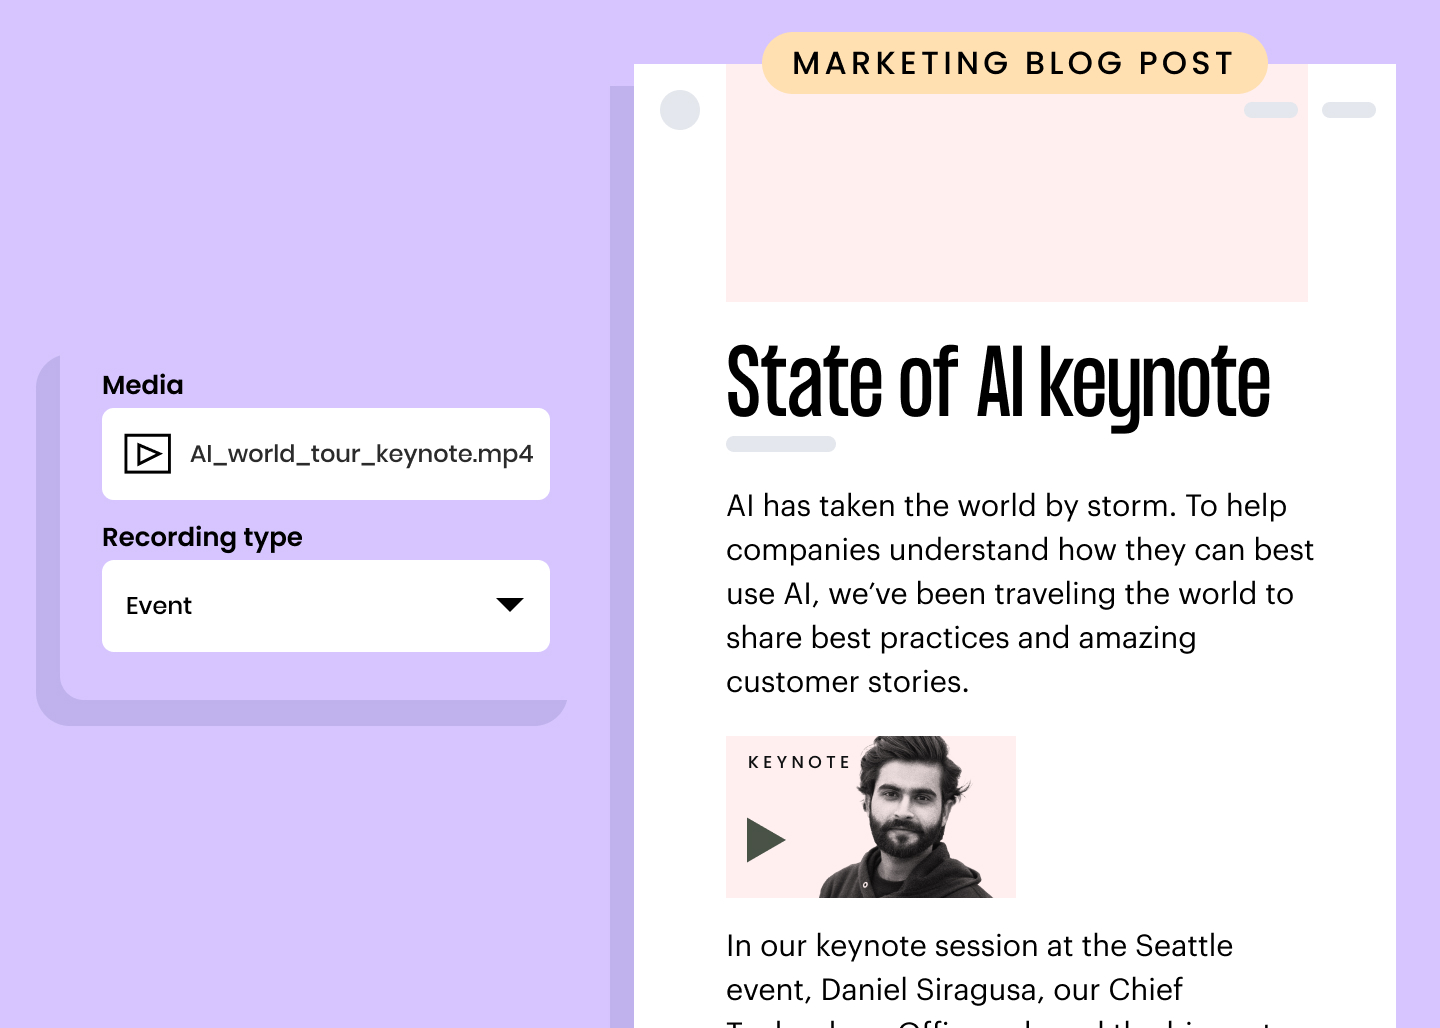 Marketing blog post example: State of AI keynote. AI has taken the world by storm. To help companies understand how they can best use AI, we’ve been traveling the world to share best practices and amazing customer stories. In our keynote session at the Seattle event, Daniel Siragusa, our Chief...